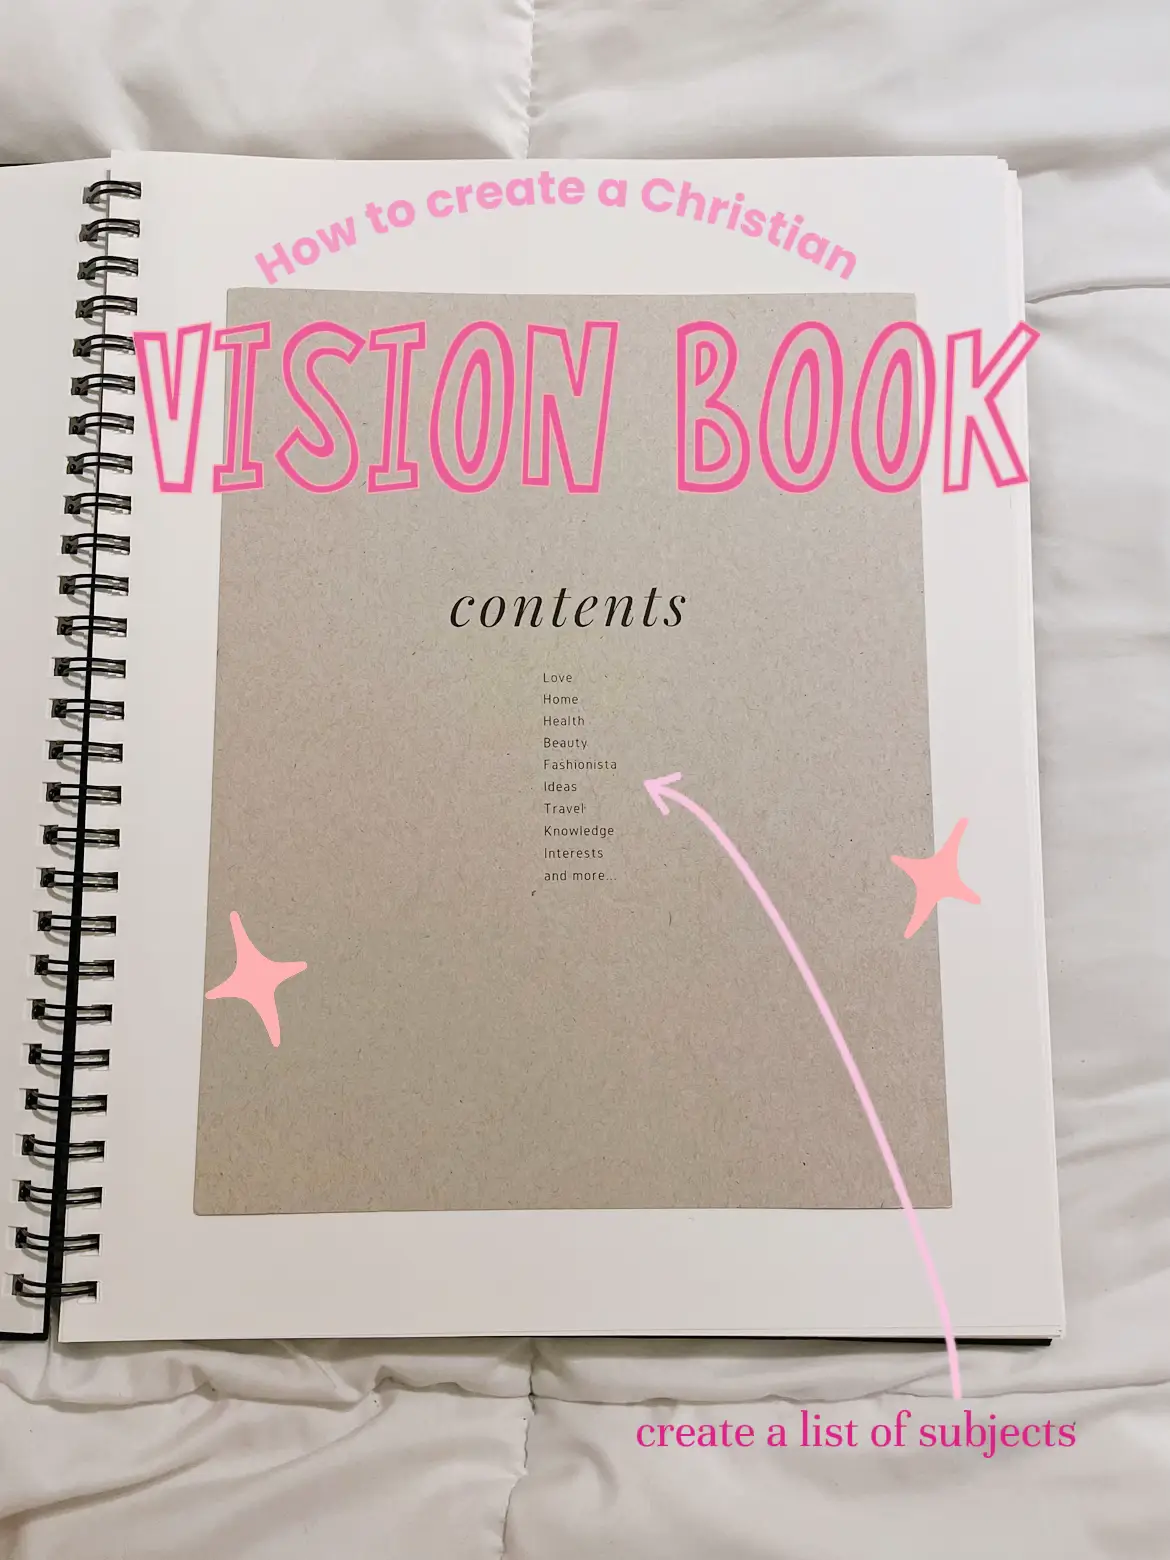 Created with Purpose: A Christian Vision Journal - Make your